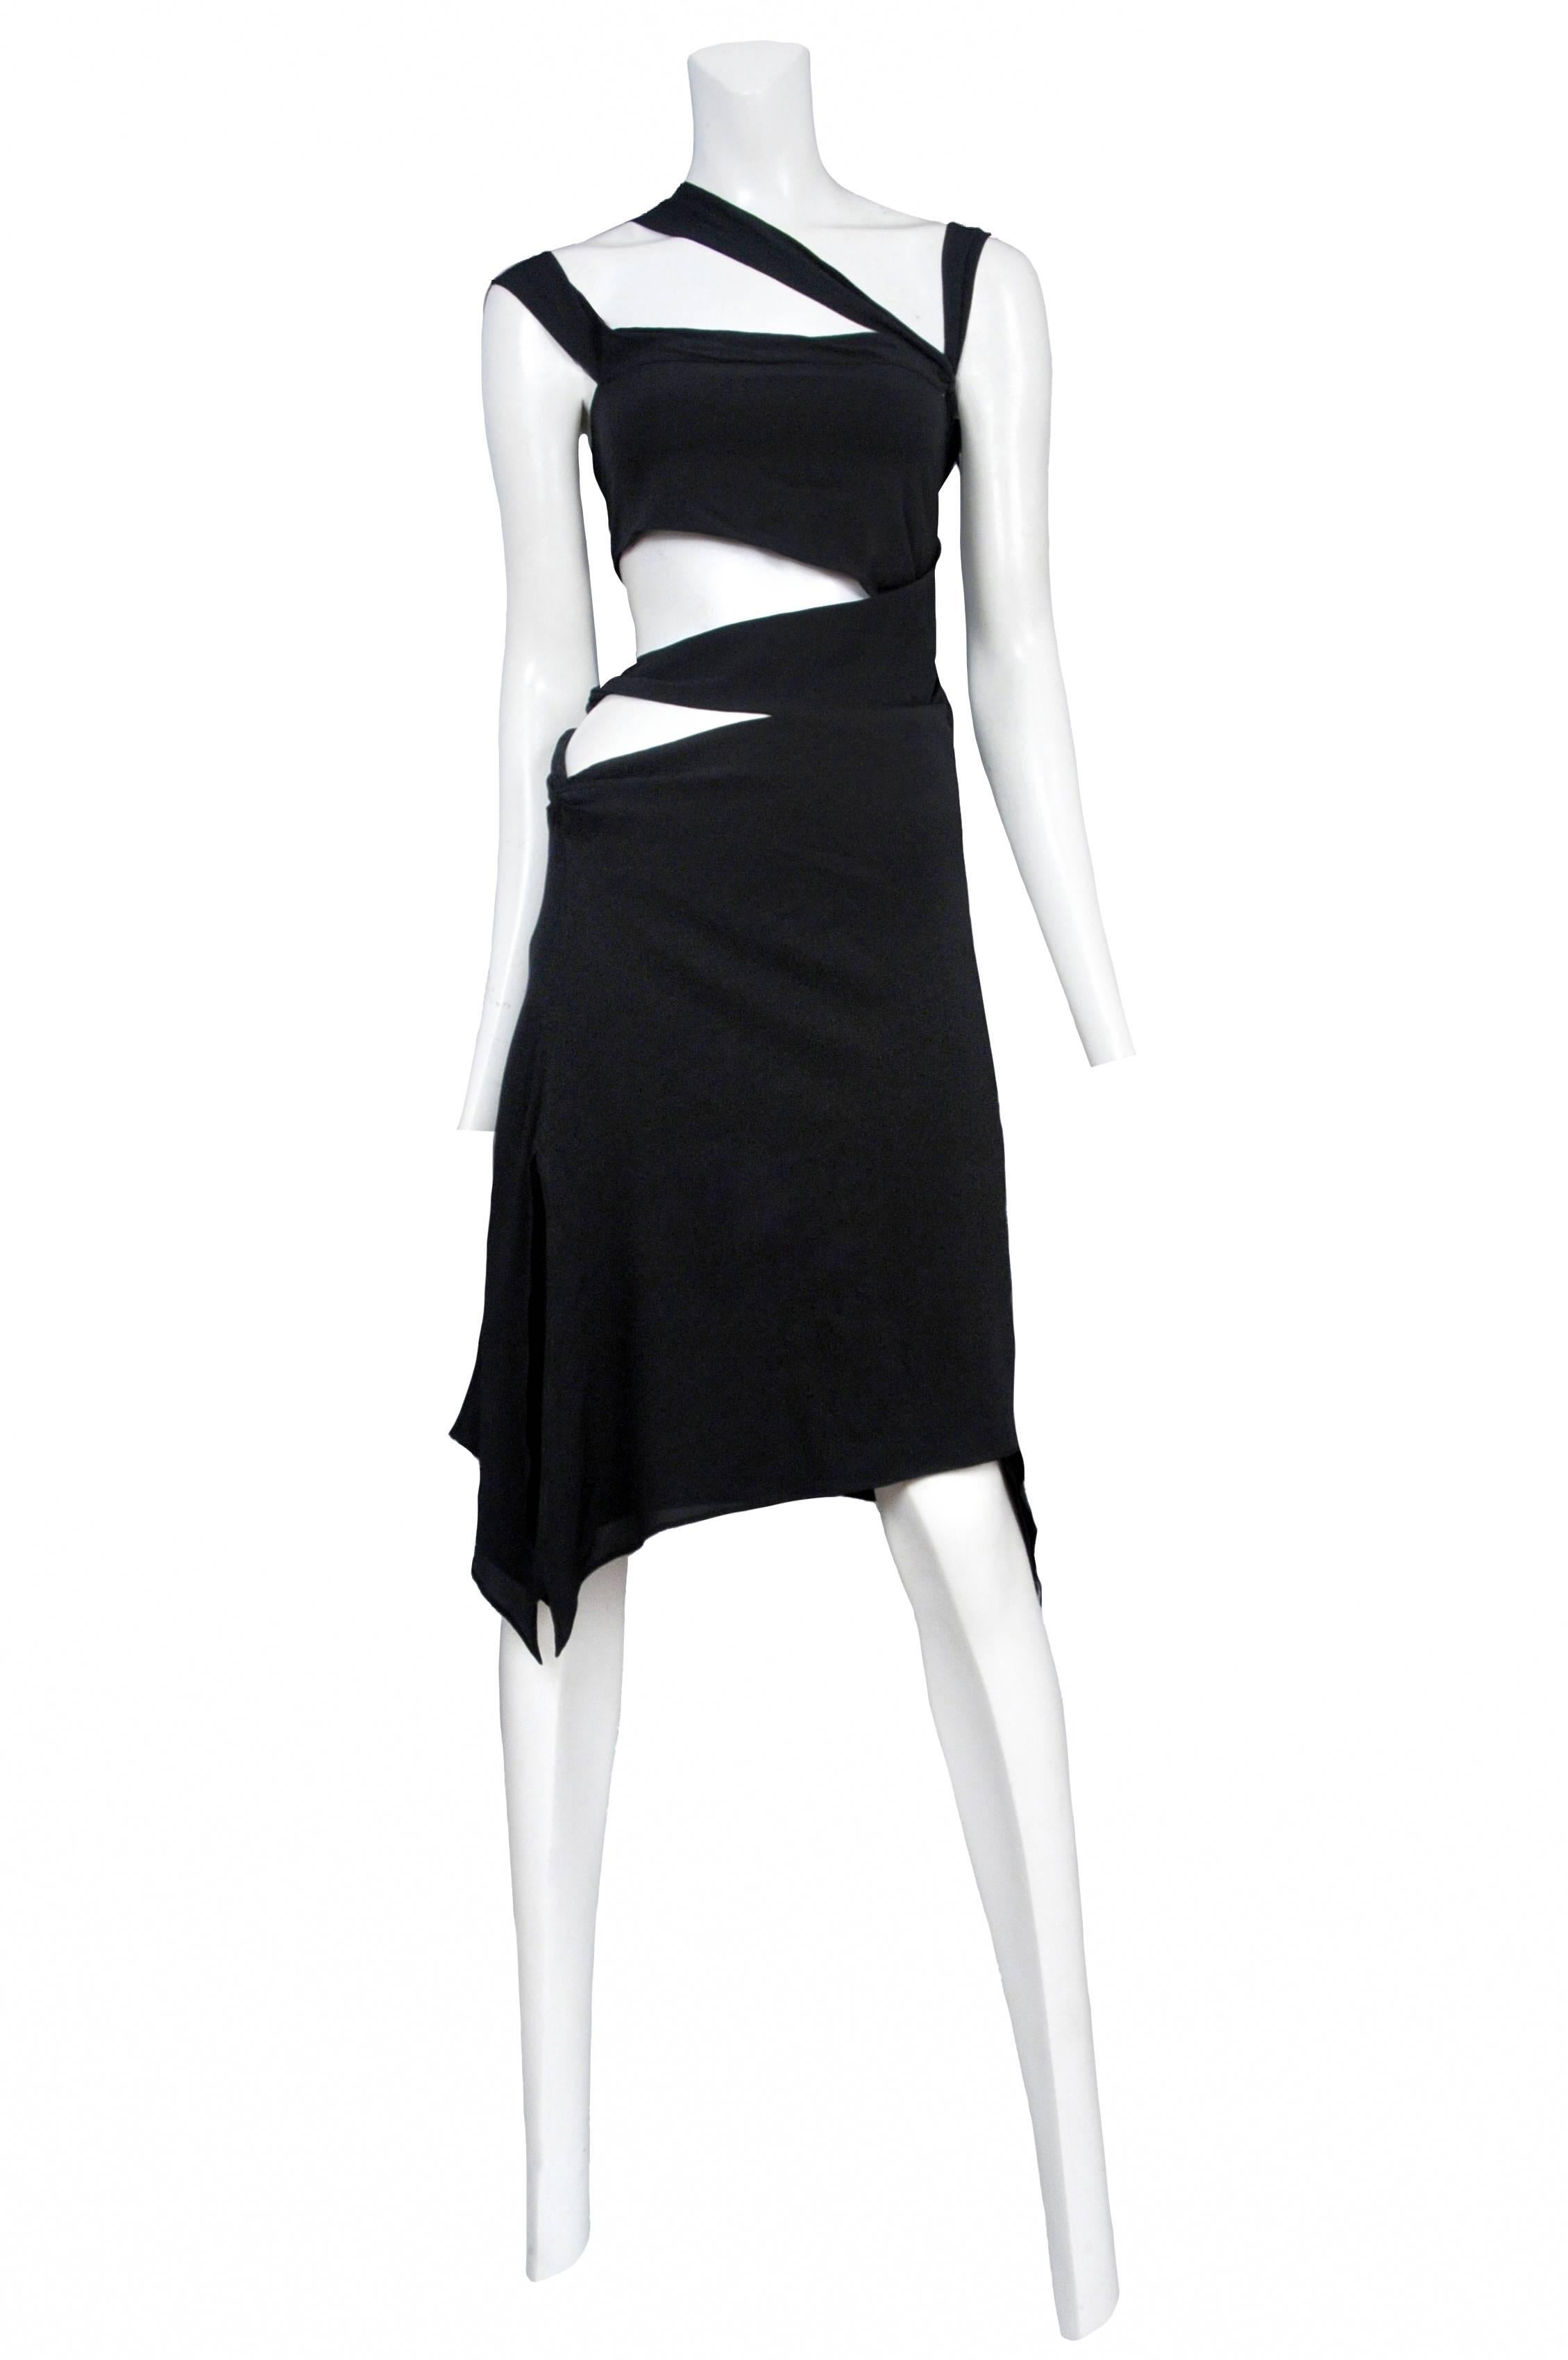 Vintage Tom Ford for Gucci black jersey knee length dress featuring cutouts at the sides and straps at the shoulders. Circa 2003.
Please inquire for additional images.